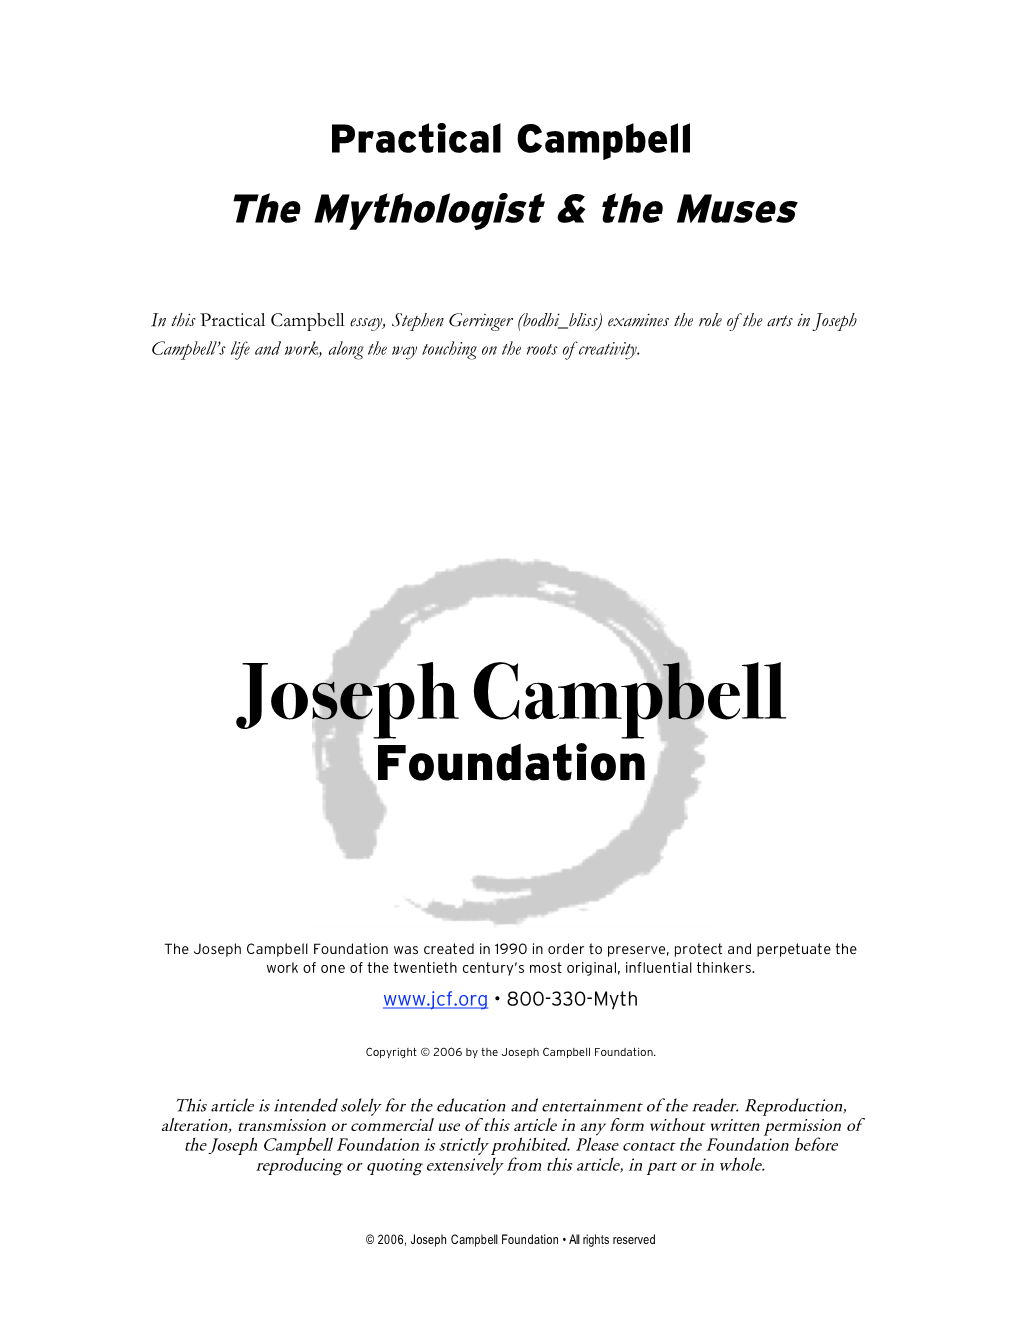 Joseph Campbell’S Life and Work, Along the Way Touching on the Roots of Creativity